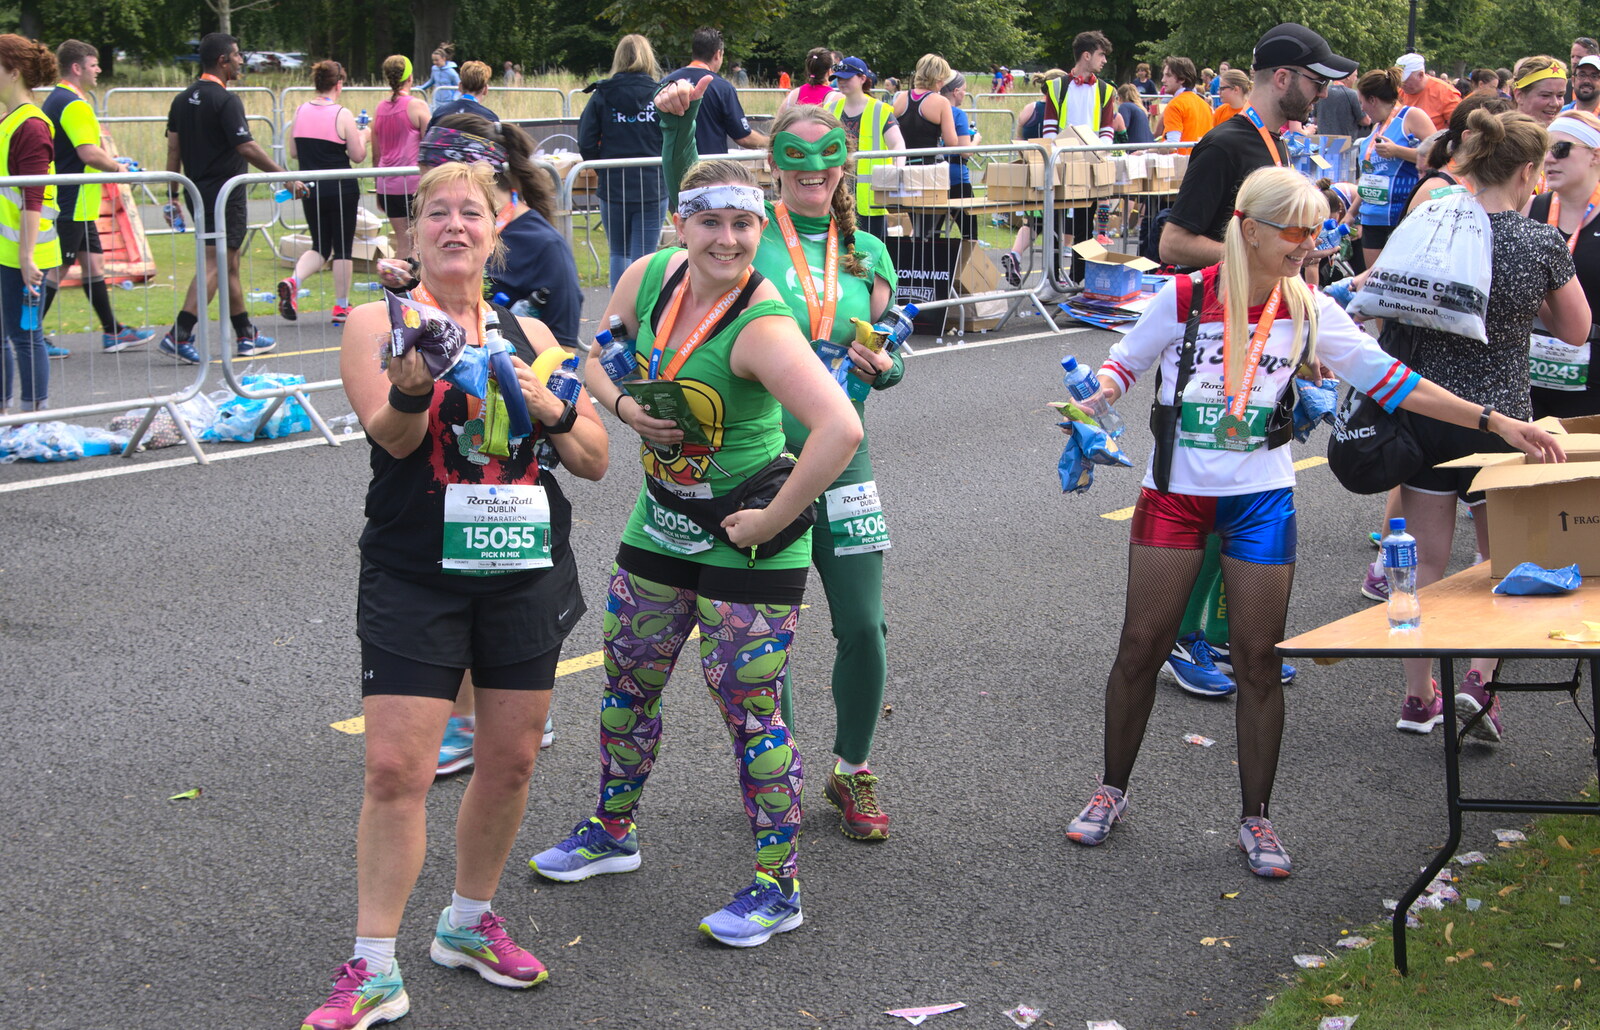 Some runners pose for the camera from Isobel's Rock'n'Roll Half Marathon, Dublin, Ireland - 13th August 2017